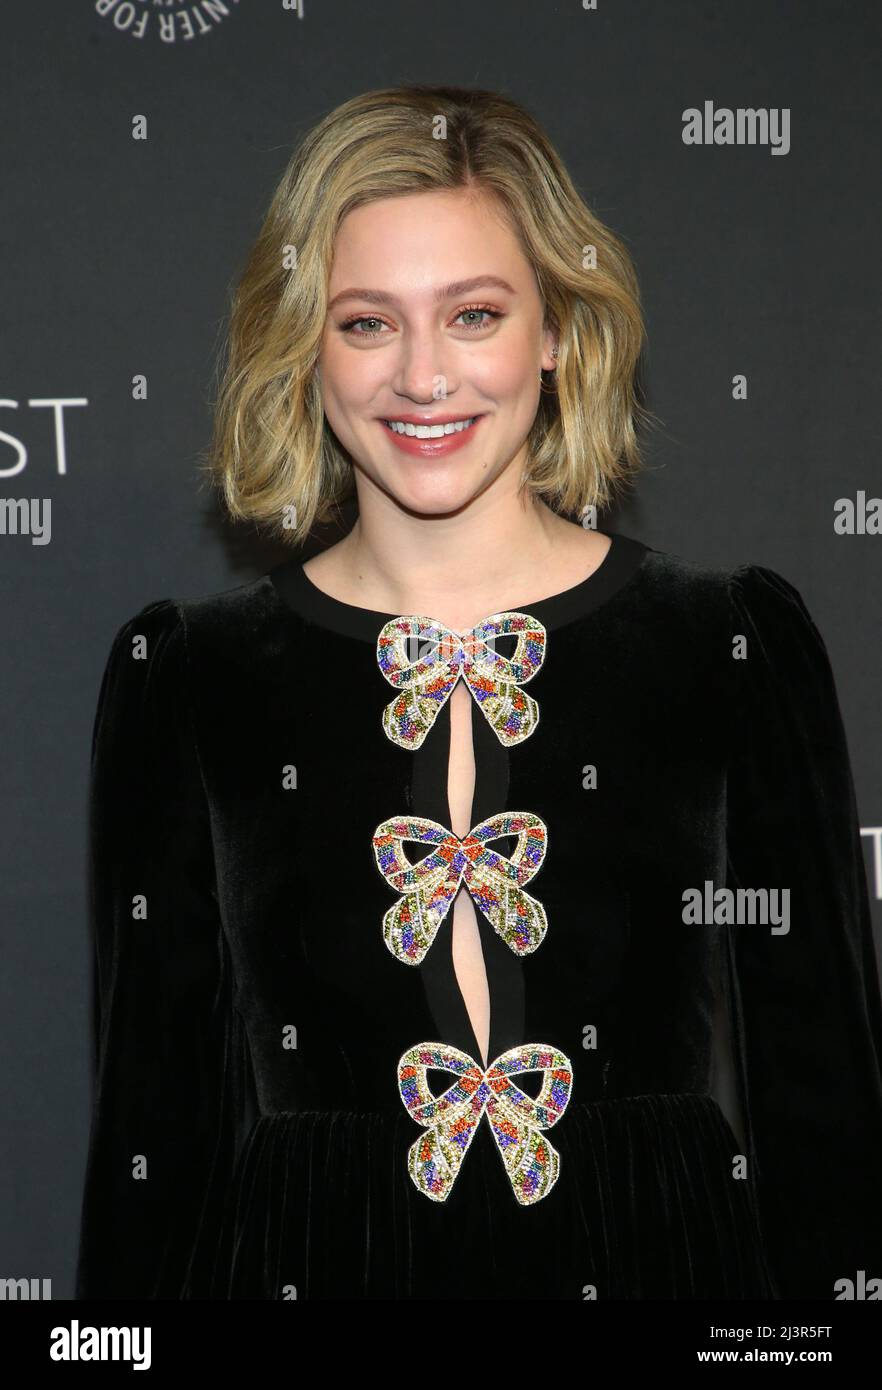 Hollywood, Ca. 9th Apr, 2022. Lili Reinhart at the Riverdale red carpet during PaleyFest La 2022 at Dolby Theatre in Hollywood, California on April 9, 2022. Credit: Faye Sadou/Media Punch/Alamy Live News Stock Photo